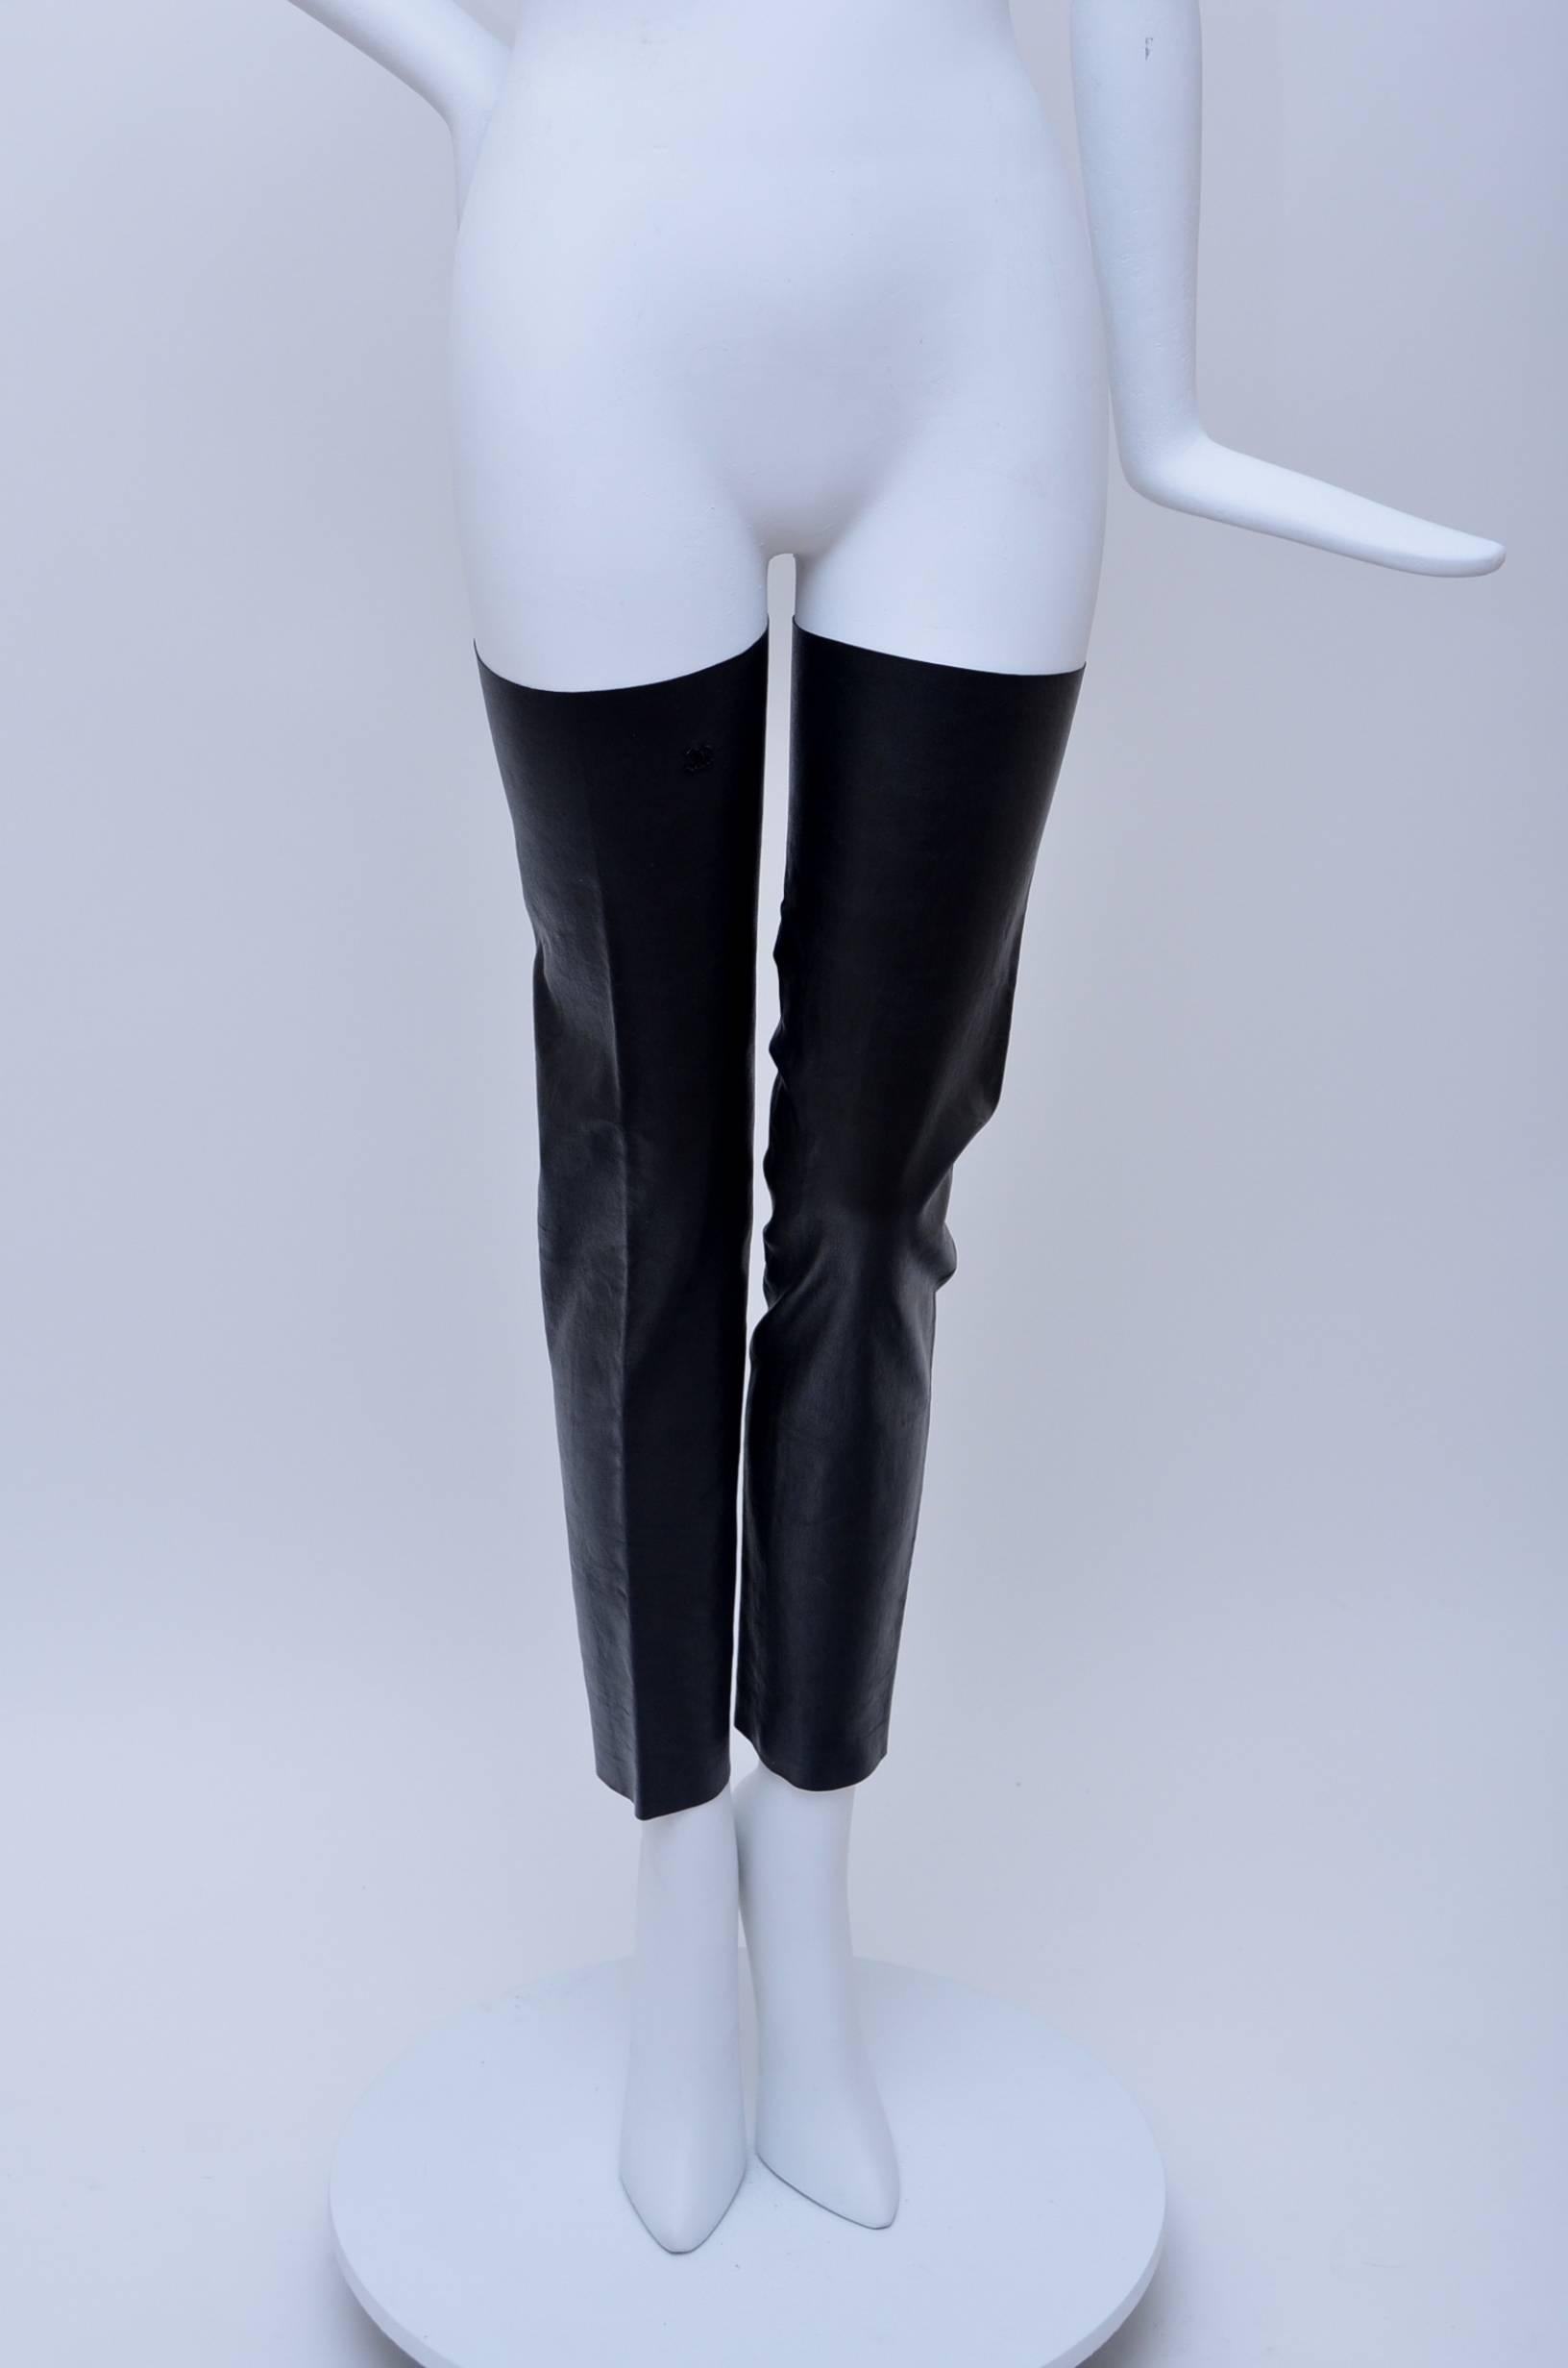 Chanel new lambskin leggings/warmers.
From runway 2003.
So versatile,you can wear them under dress,with boots or tweed suit  as seen on the runway.
Zip closure on the back.Marked size 1.
Leather does stretch little bit but please check